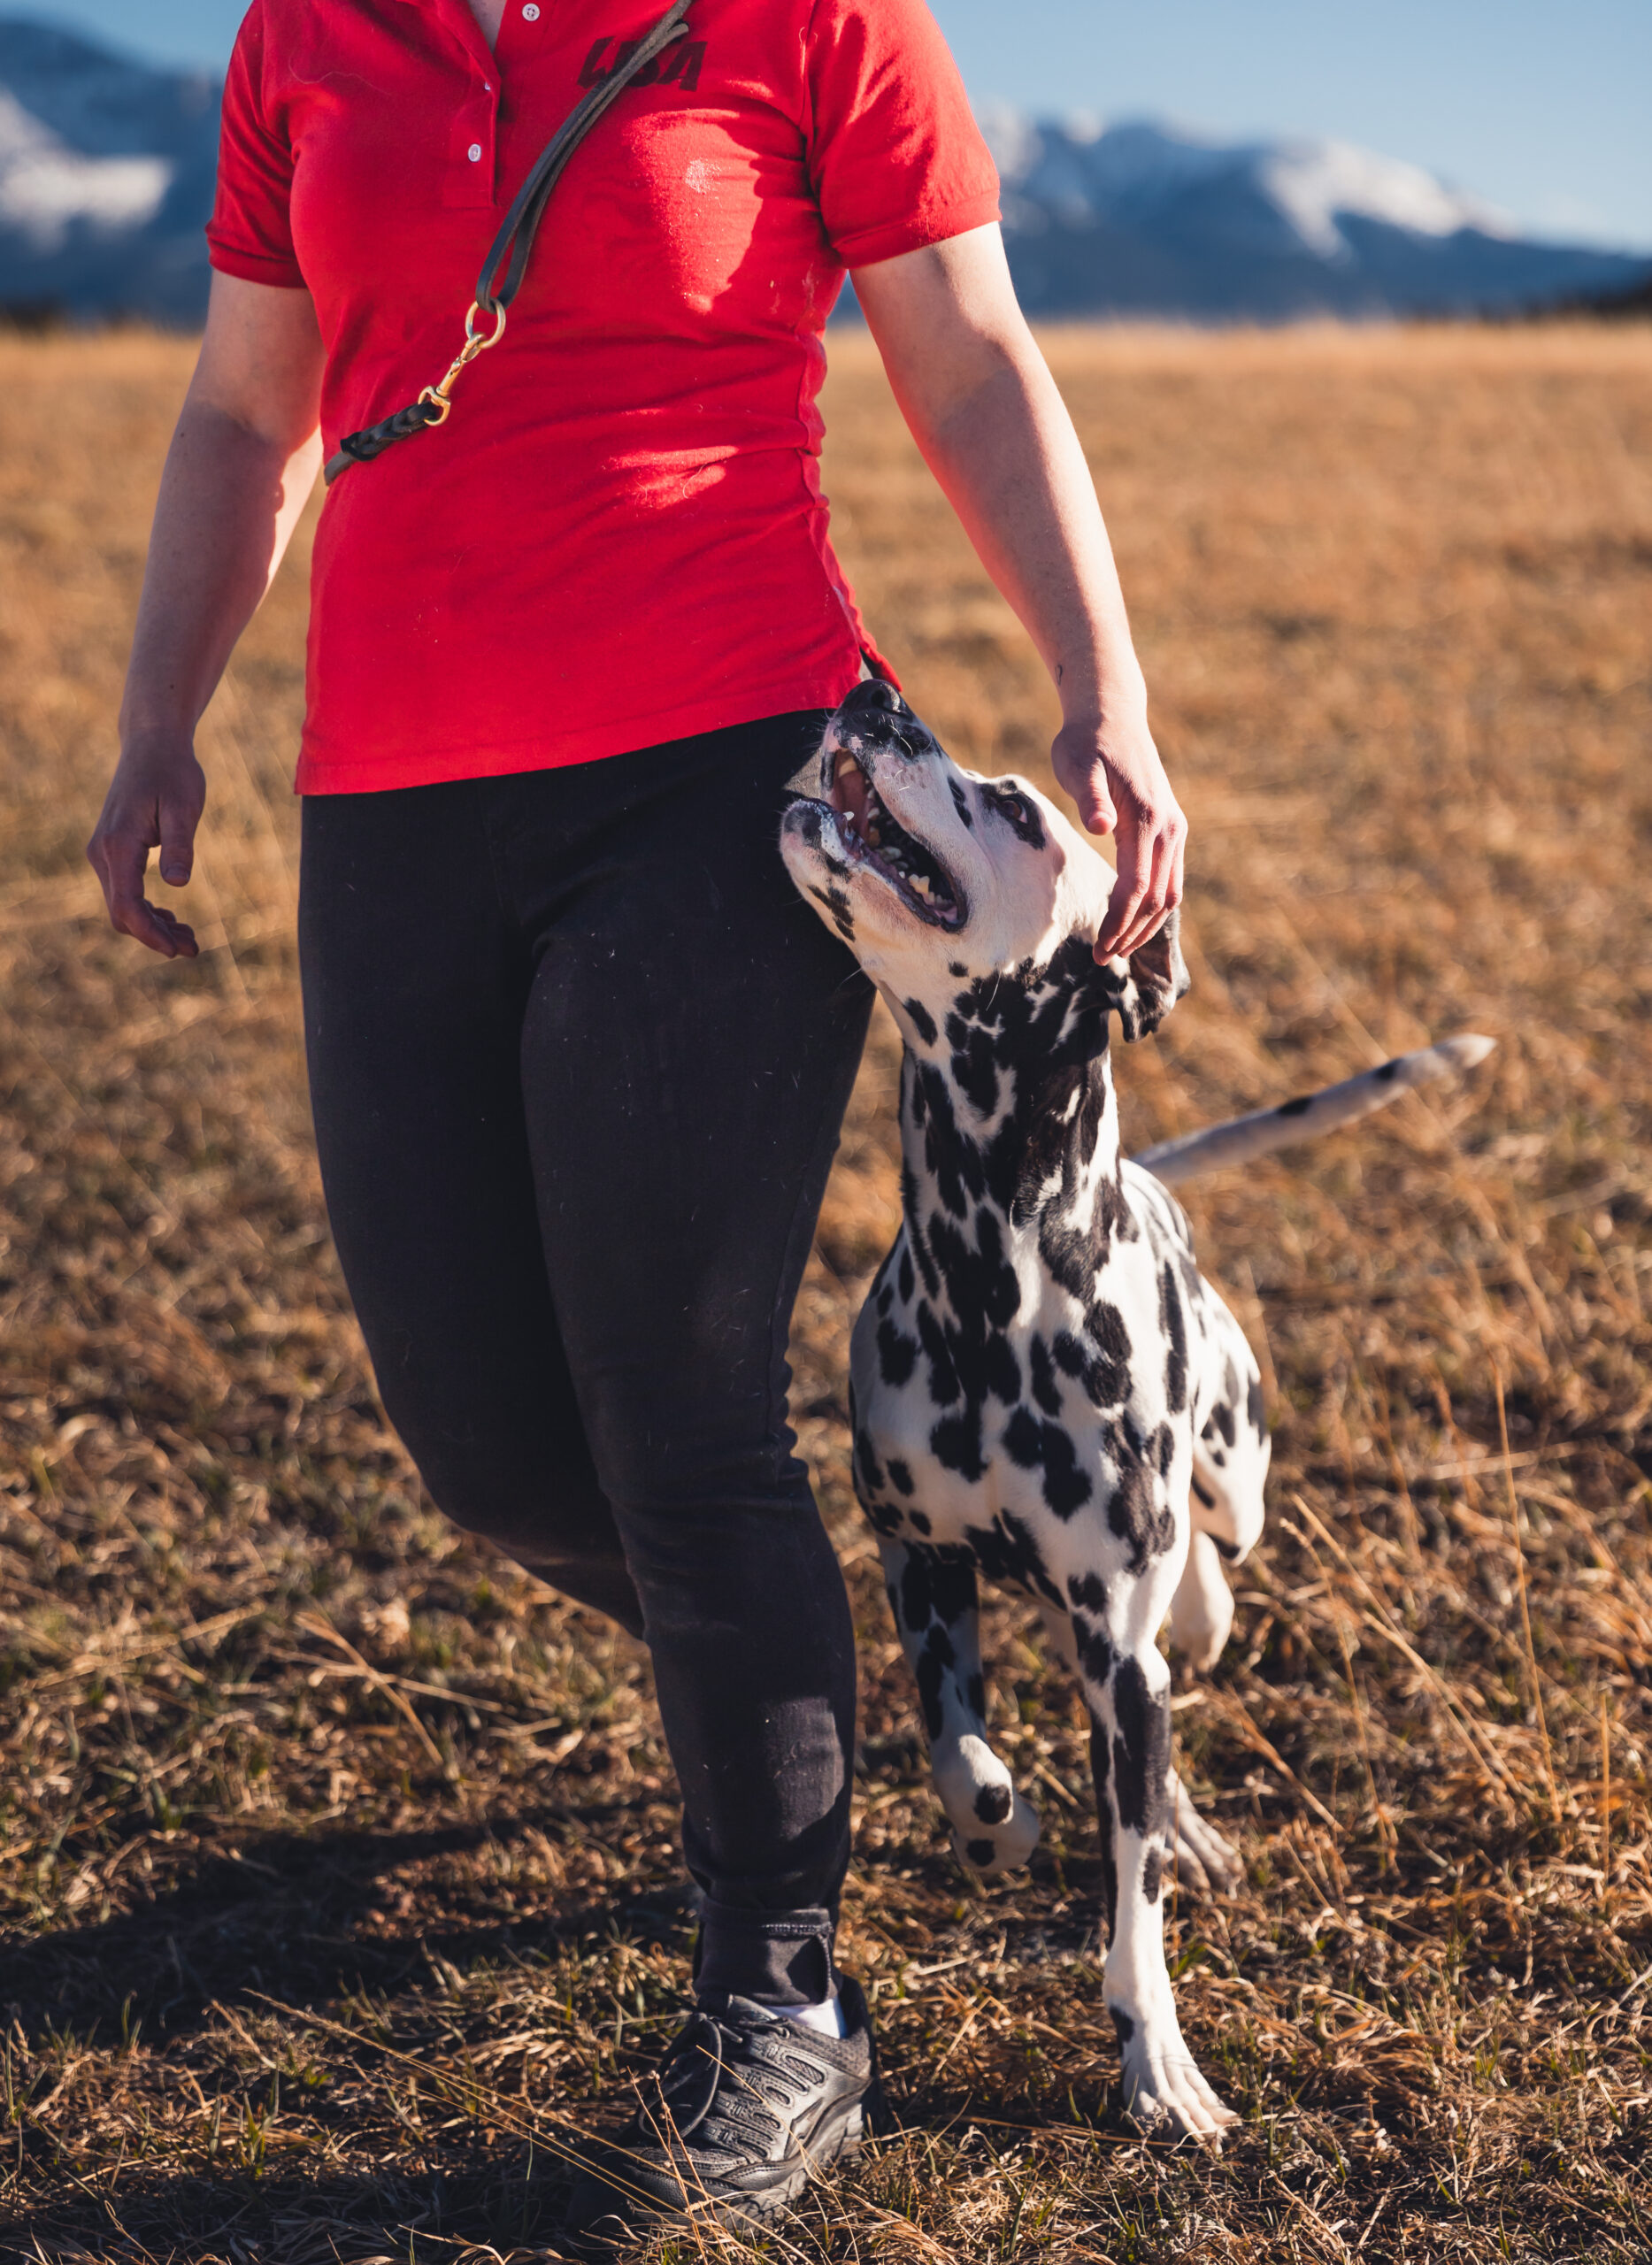 Dalmatian heels close to trainer in outdoor setting in Colorado Springs